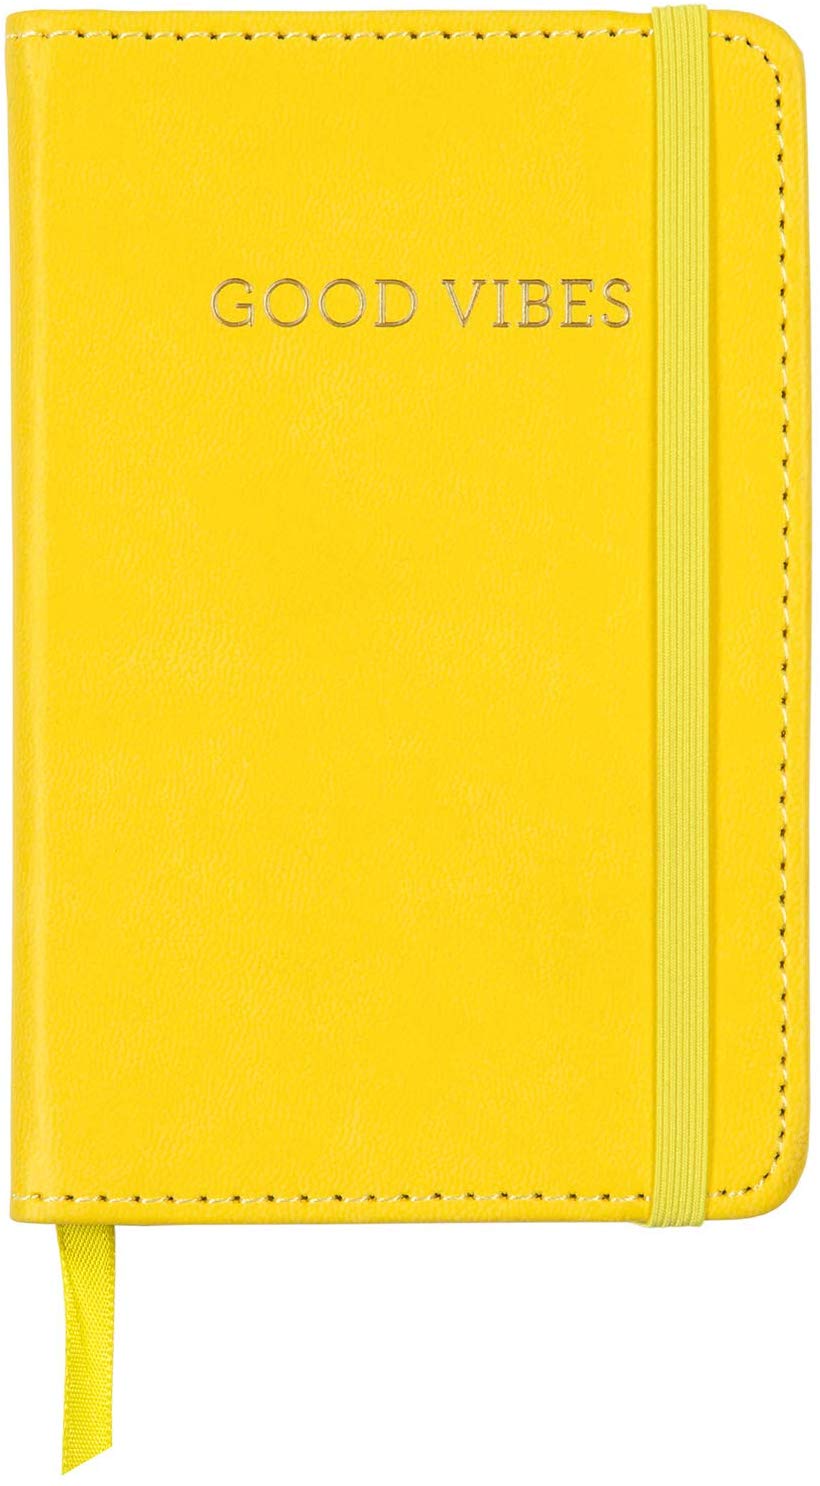 Journal to make notes, helps with brain fog. Yellow leather cover says "Good Vibes."